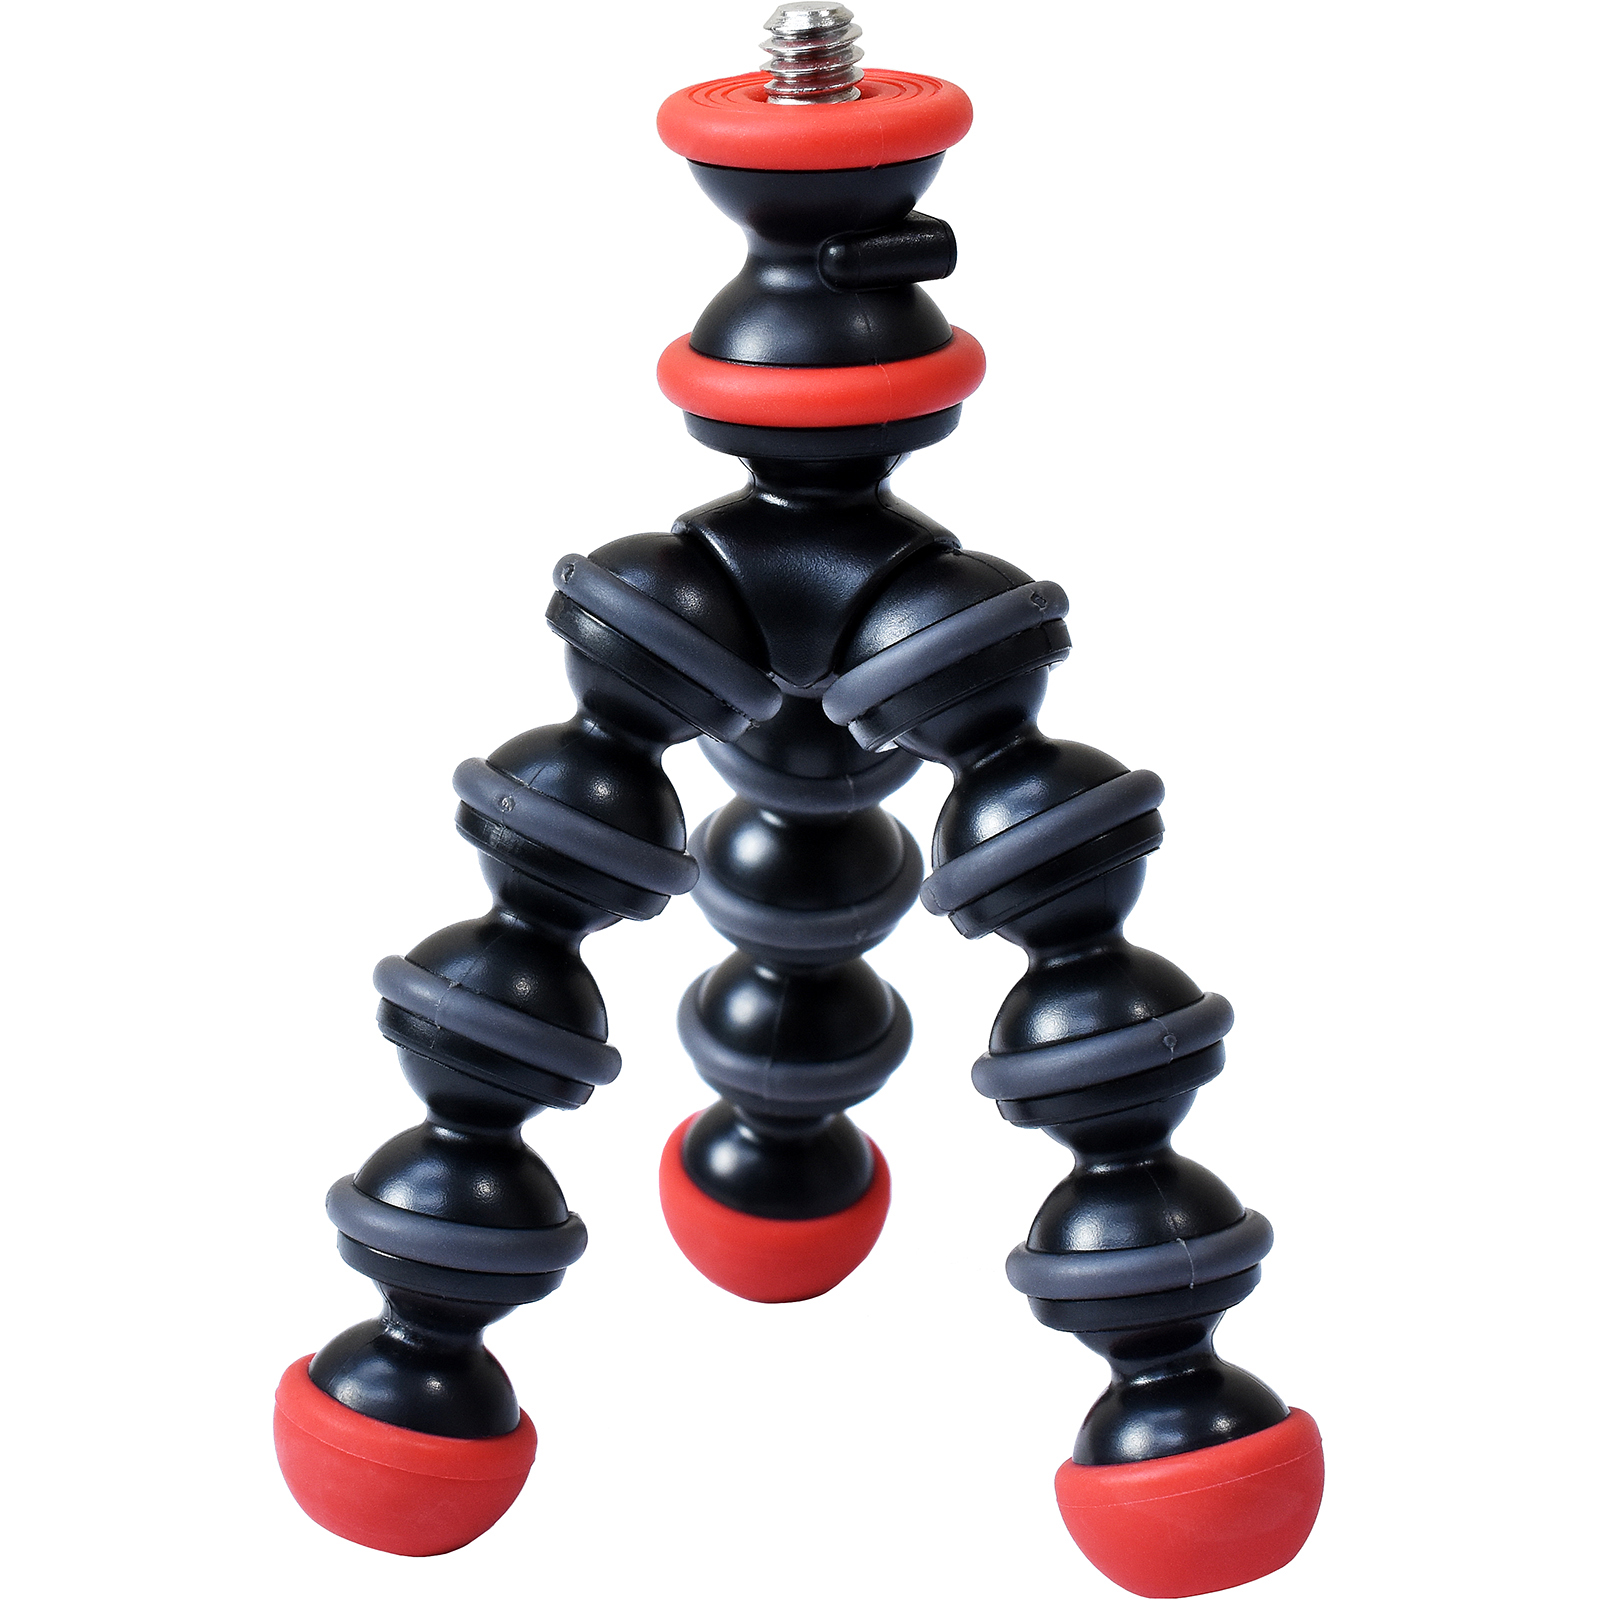 Joby GorillaPod Magnetic Mini Flexible Tripod for Point & Shoot and Small Cameras - image 1 of 5